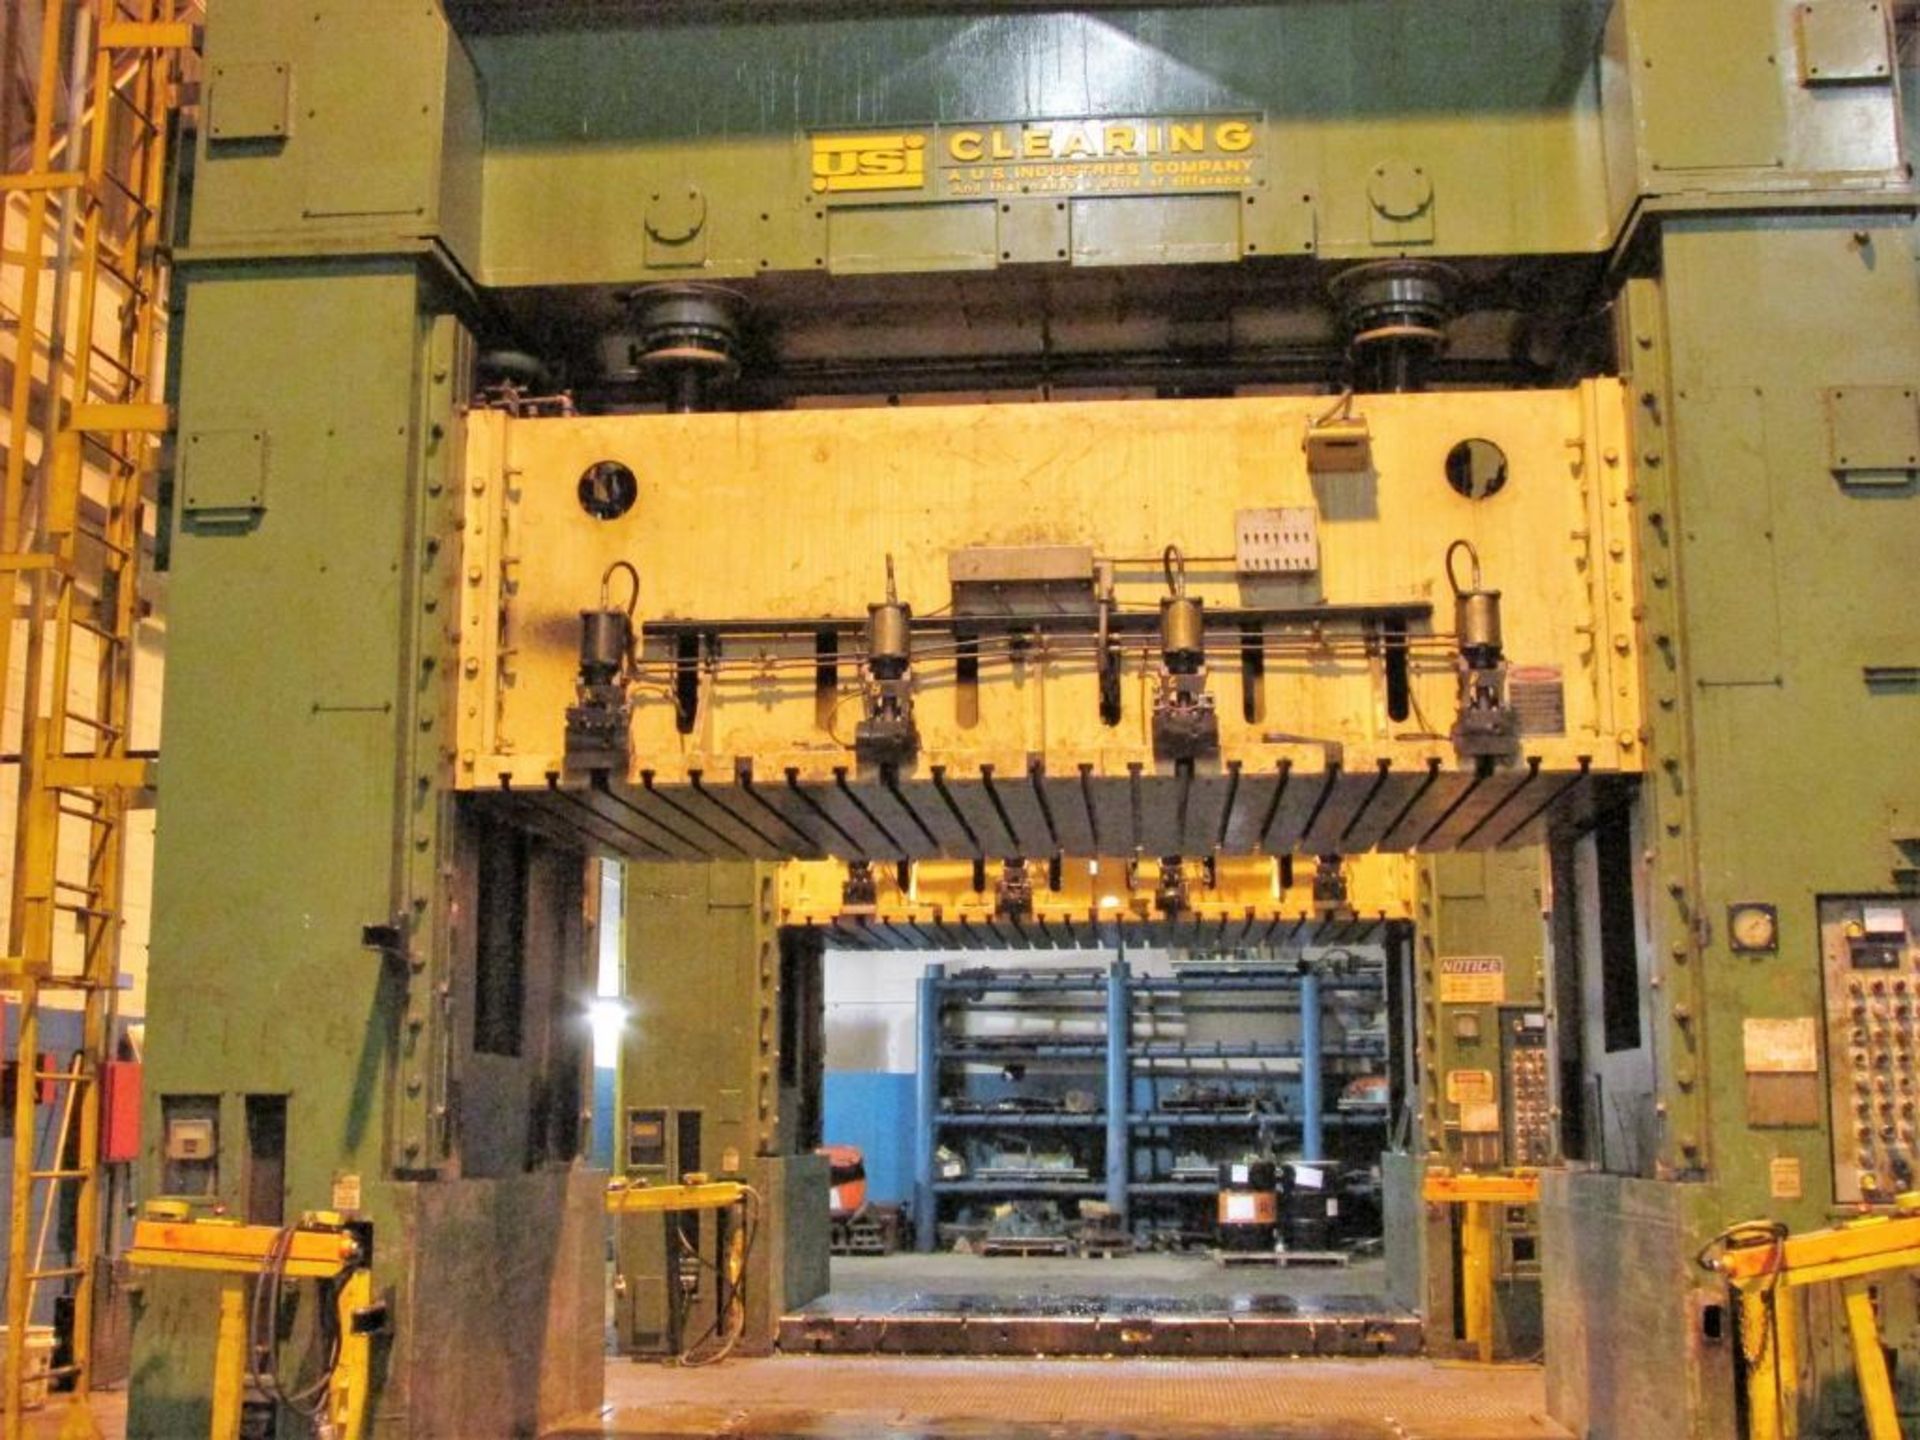 USI Clearing SE4-500-144-84 500 Ton Four Point Straight Side Press - Image 4 of 19